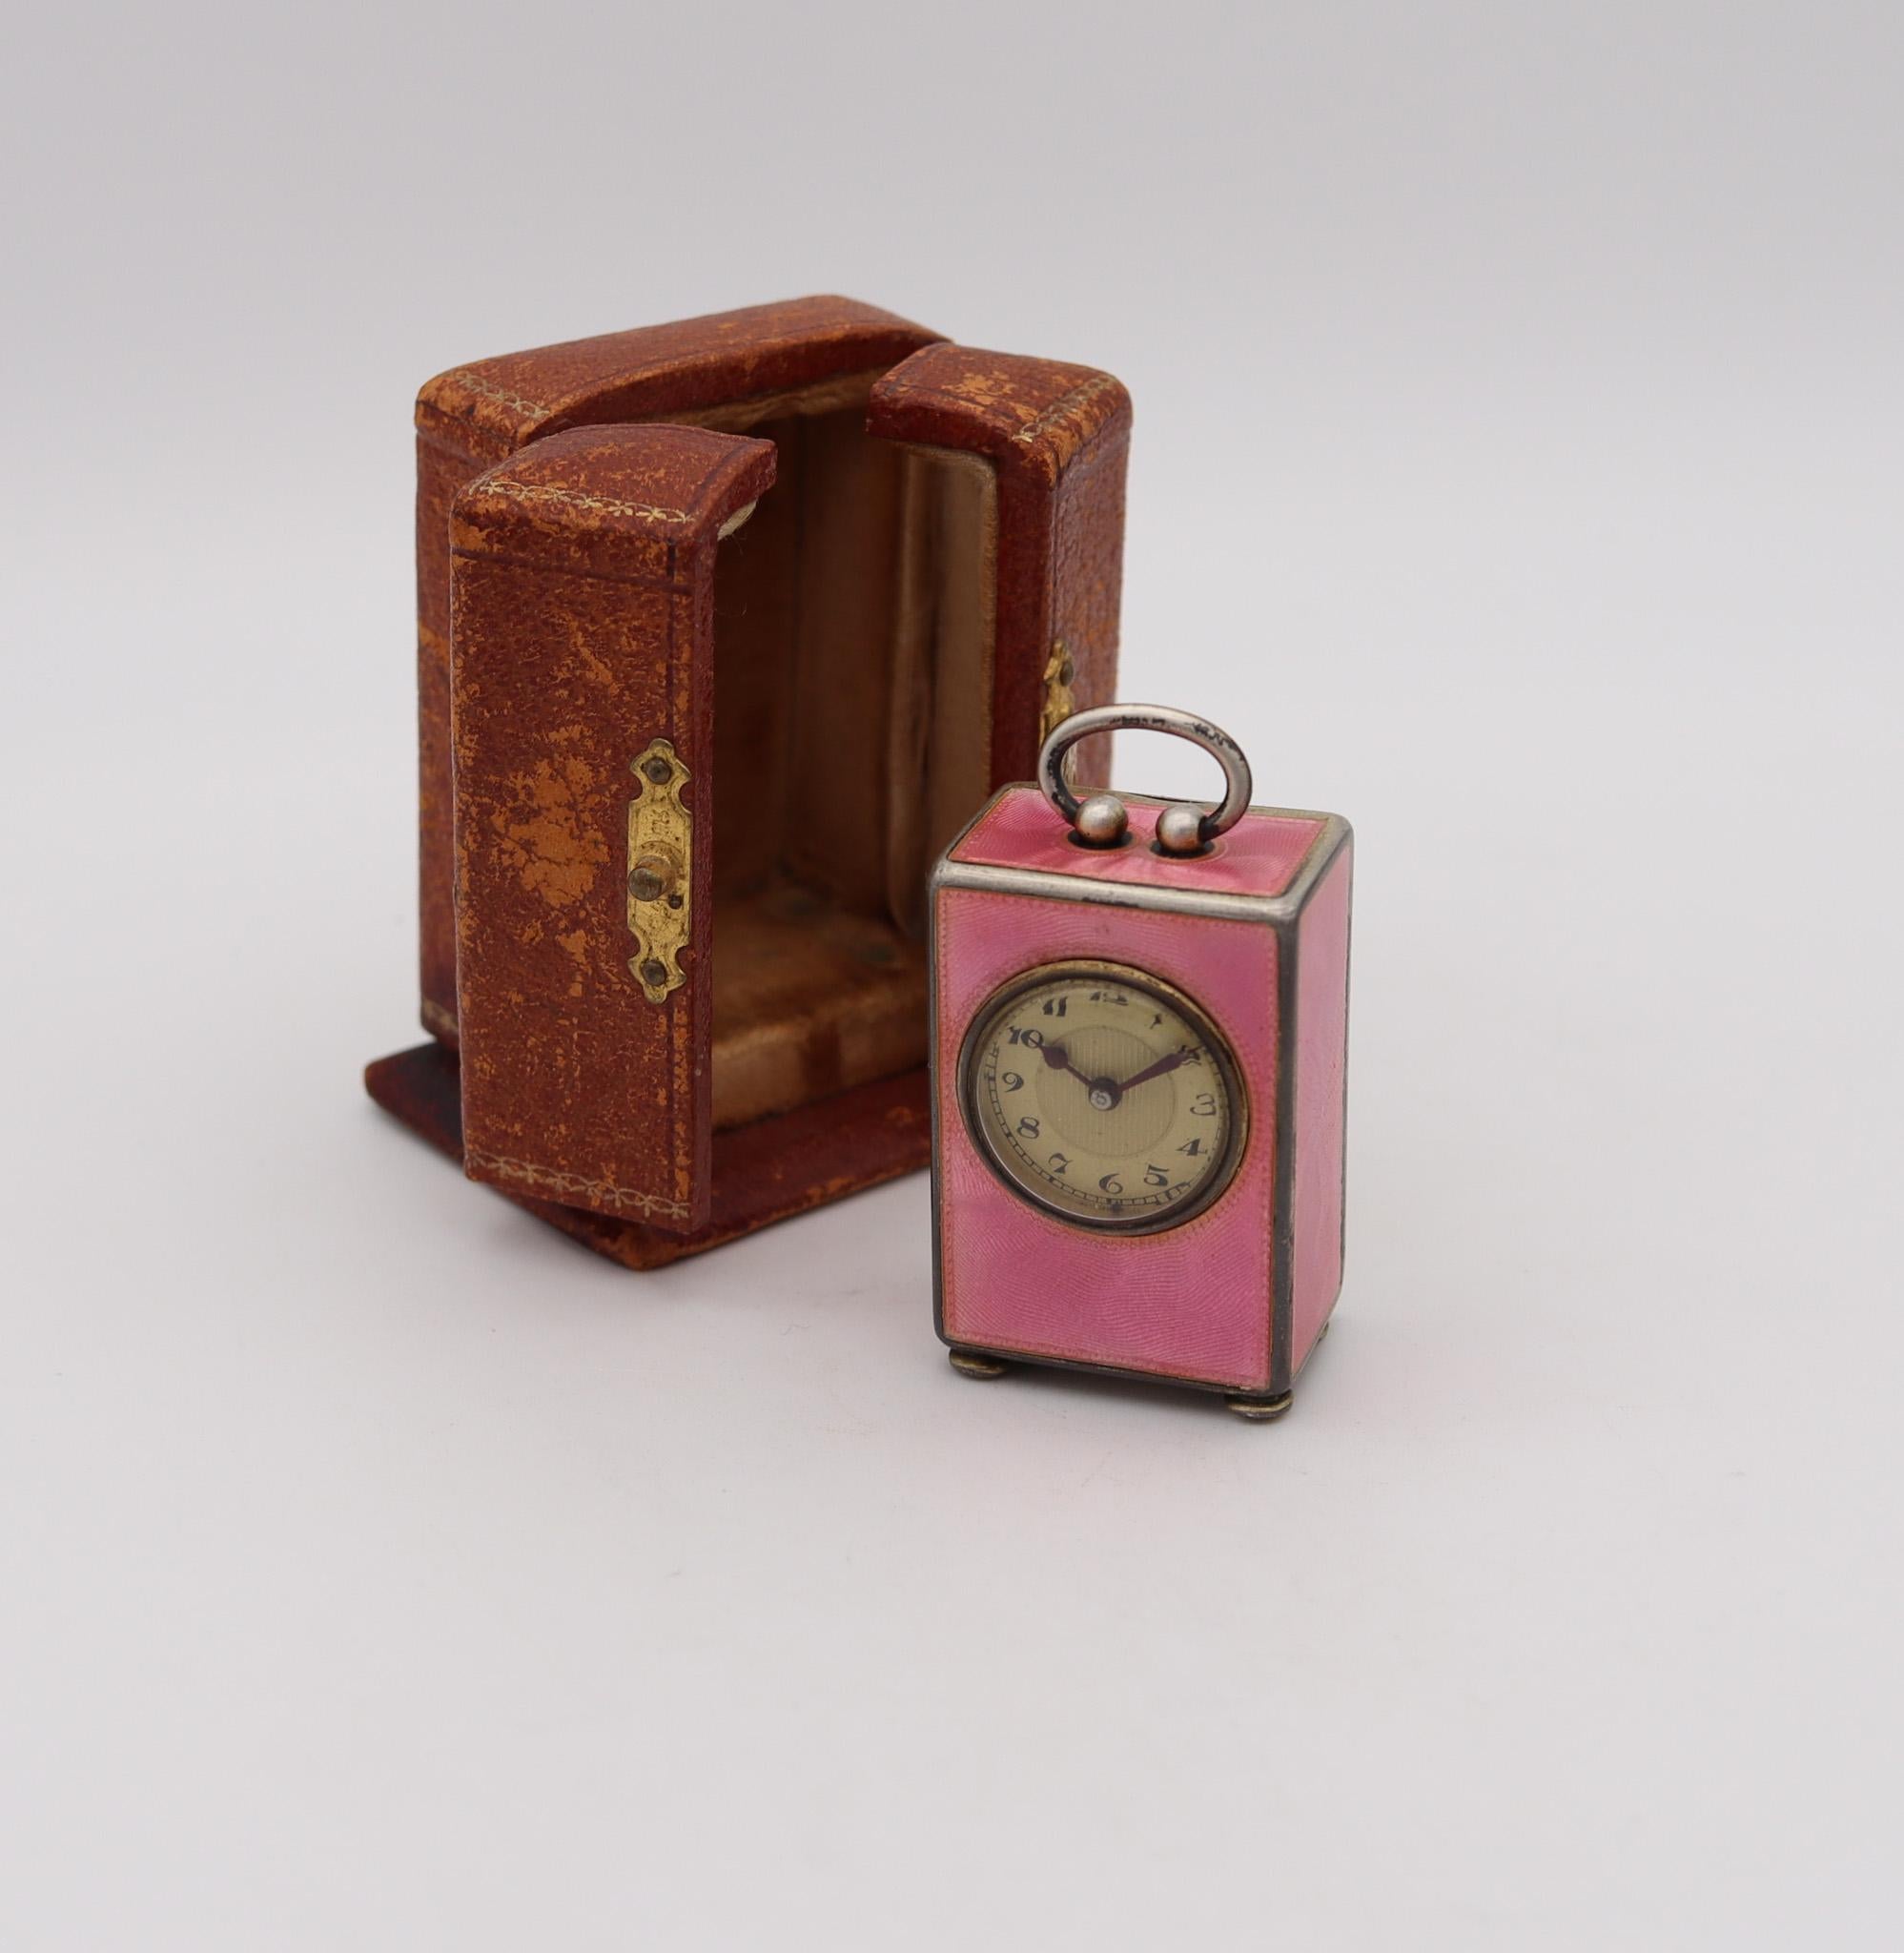 An Edwardian miniature travel clock designed by Valmé.

Extremely beautiful antique miniature travel-carriage clock, made in Geneva Switzerland by the Concord Watch Co. This little antique clock is exceptional, created during the Edwardian and the